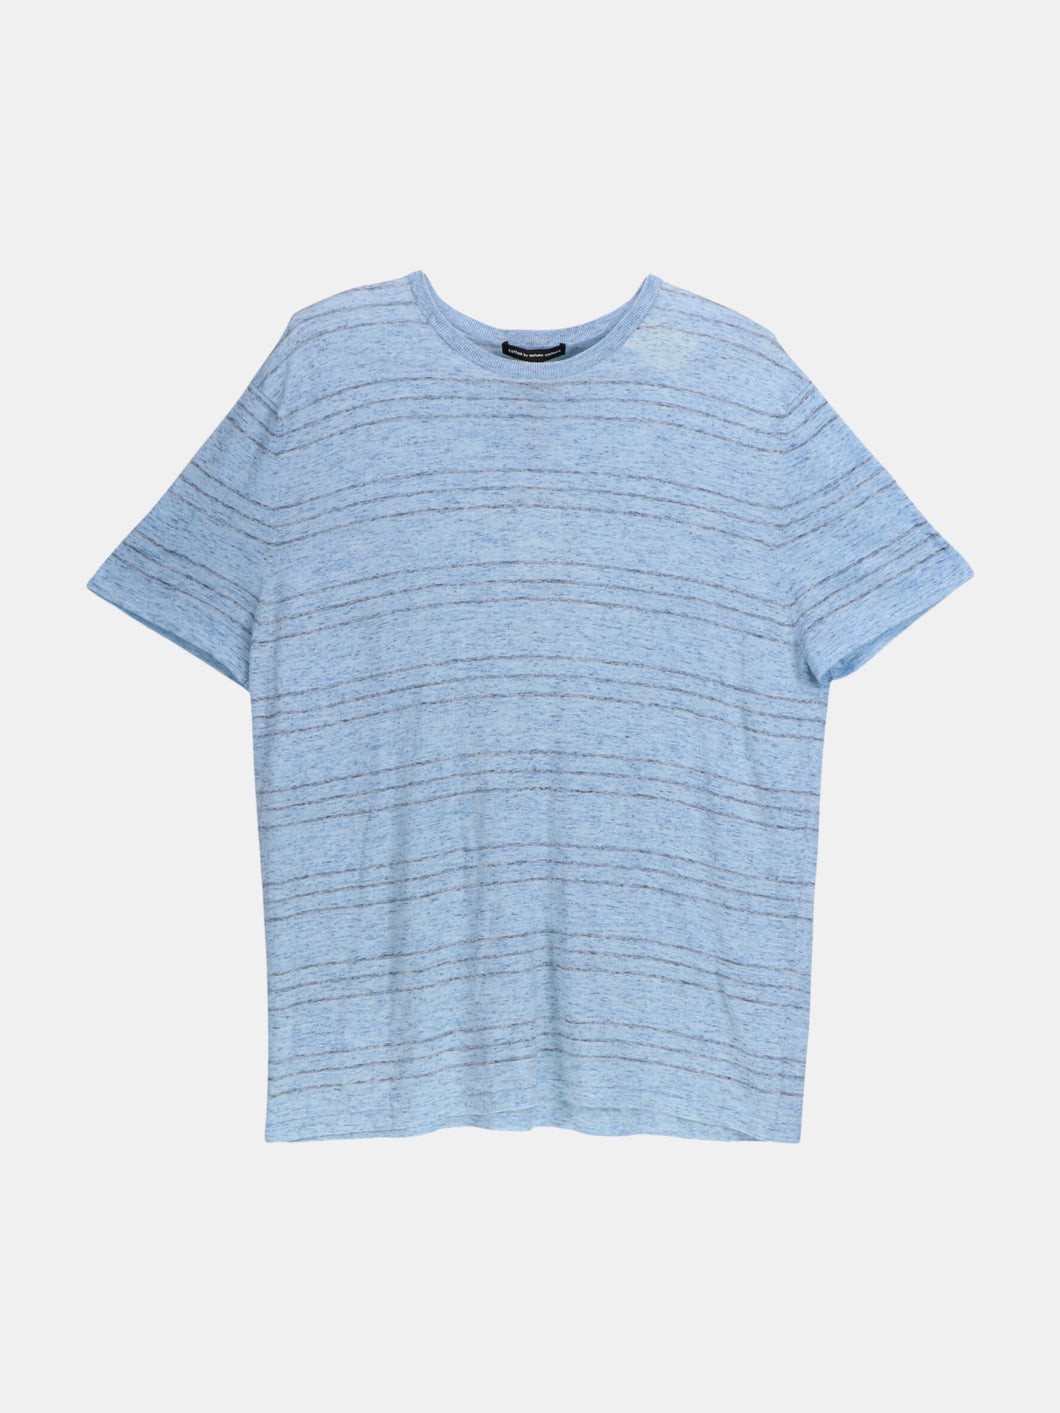 Cotton By Autumn Cashmere Men's Sky / Slate Blue Crew With Thin Stripe Graphic T-Shirt